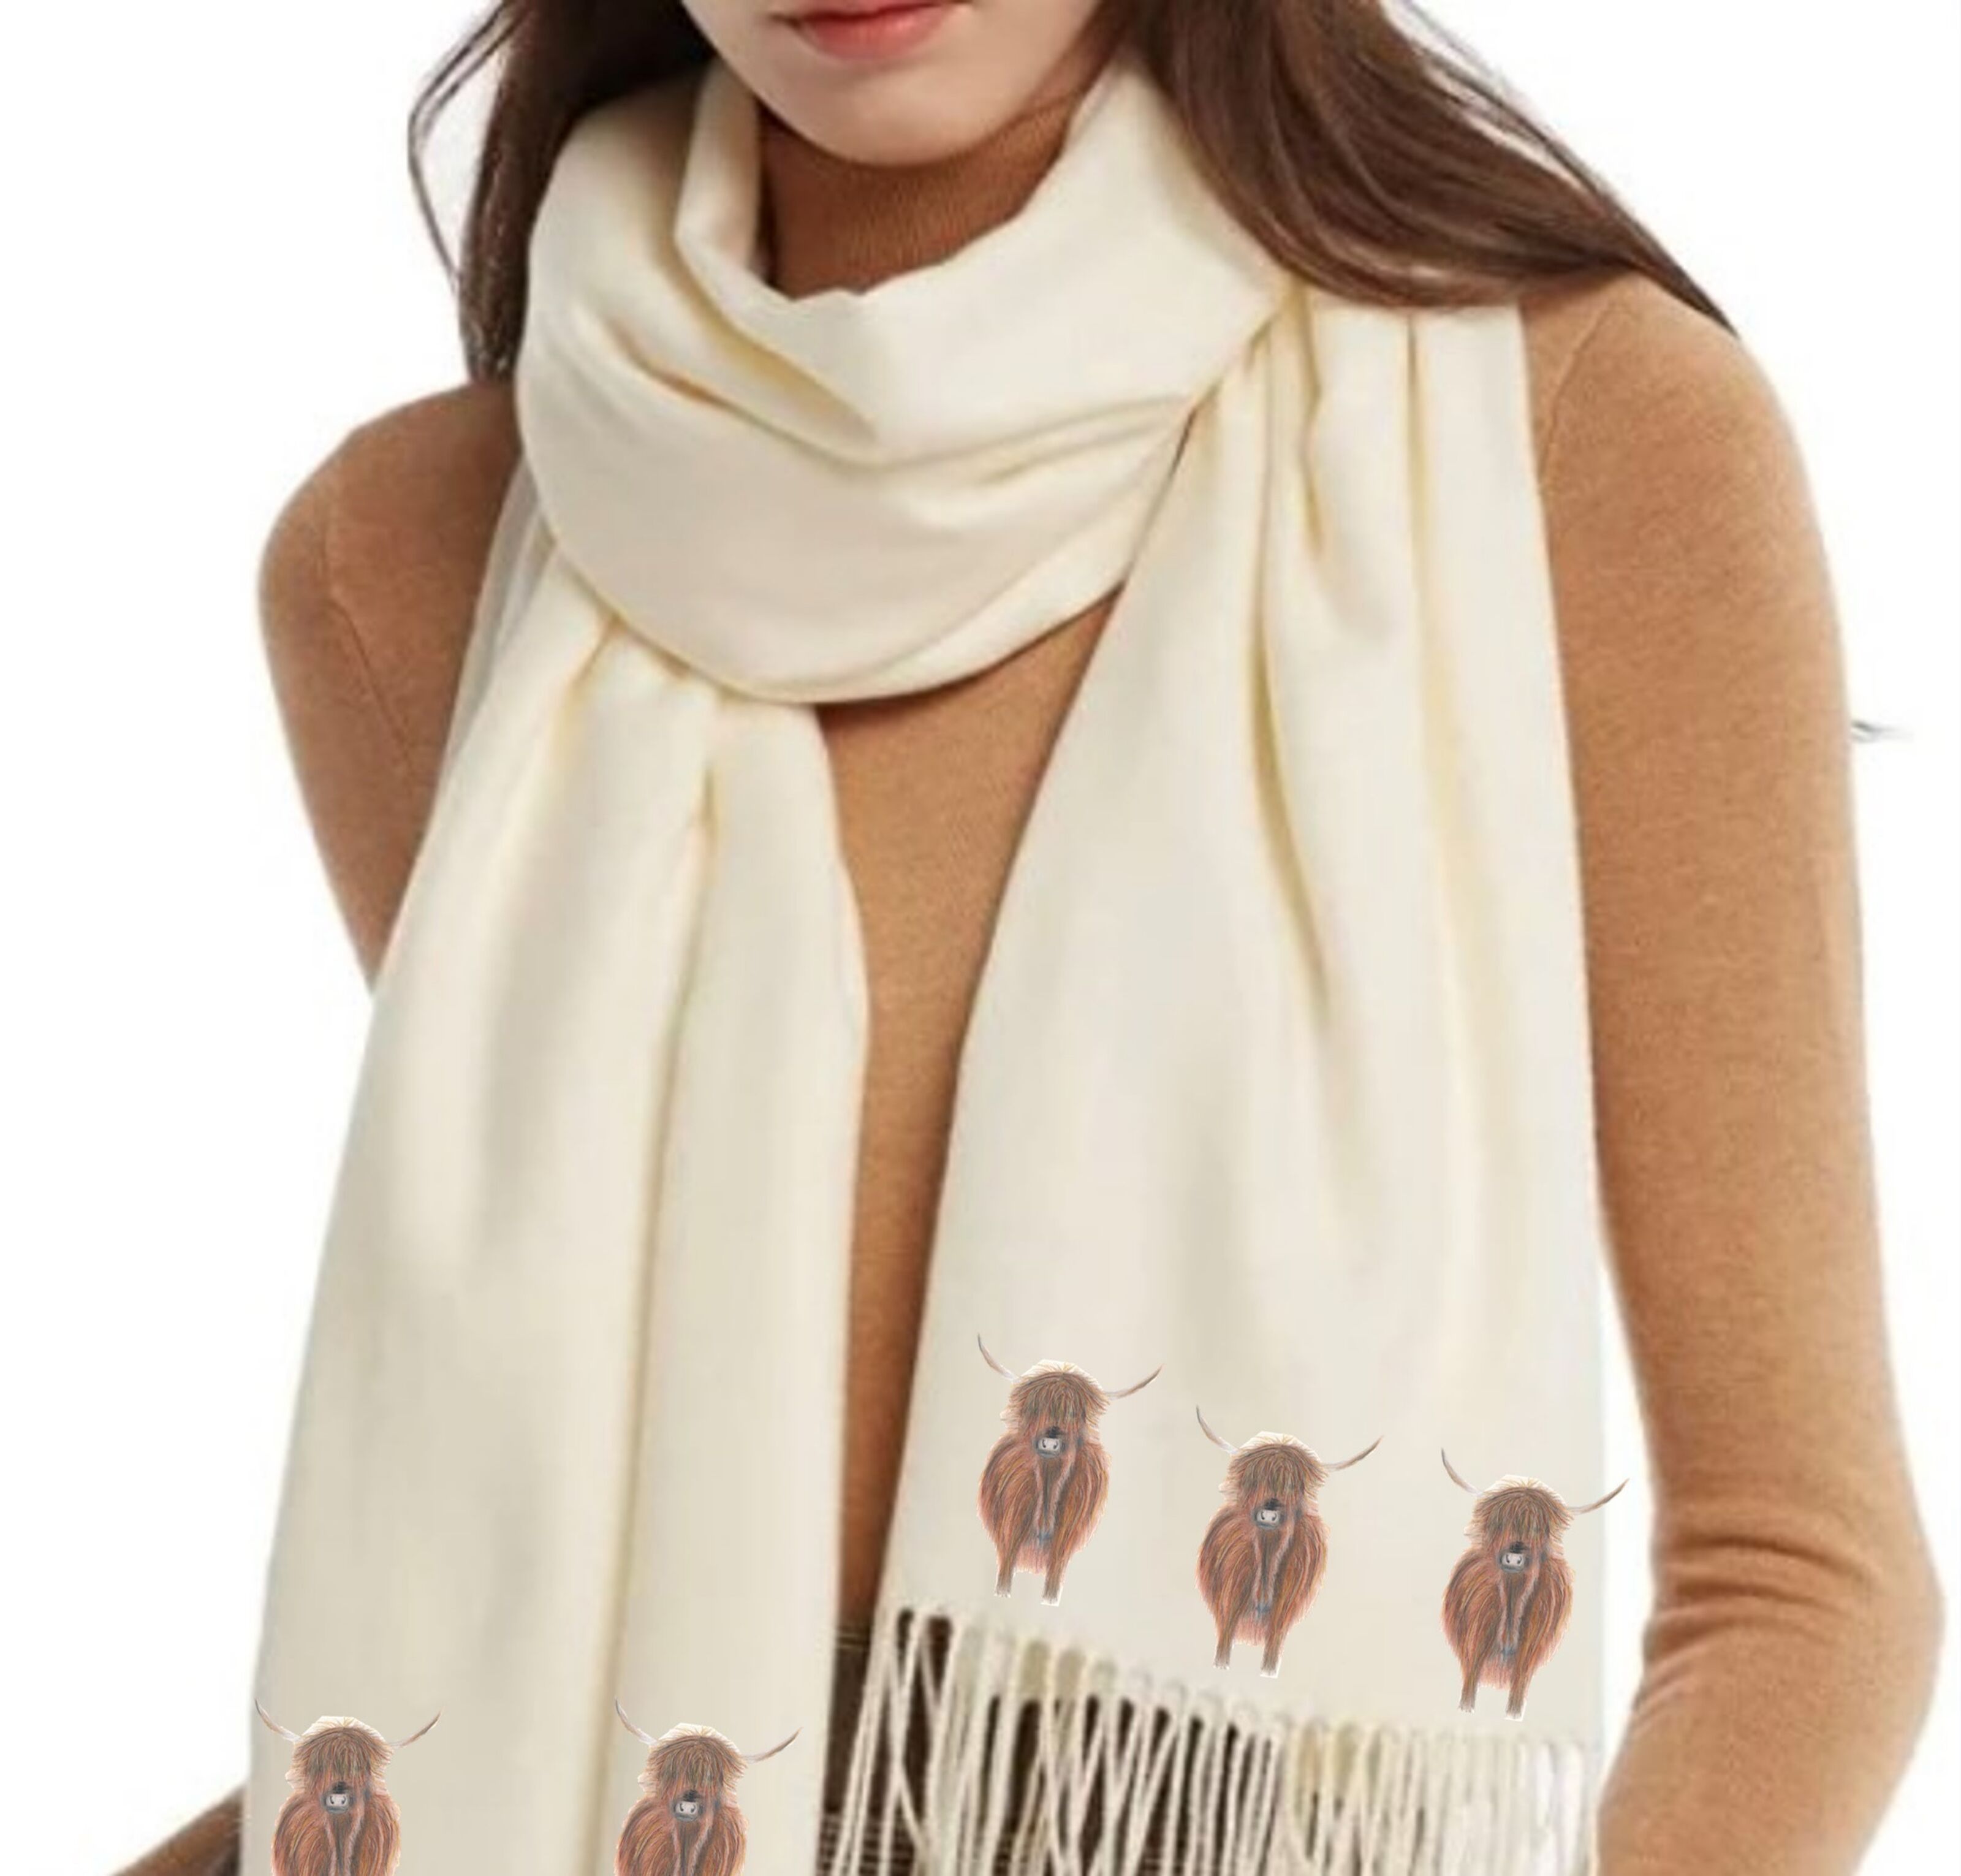 Buy wholesale Cashmere Blend Scarf Handprinted with Highland Cows on Cream